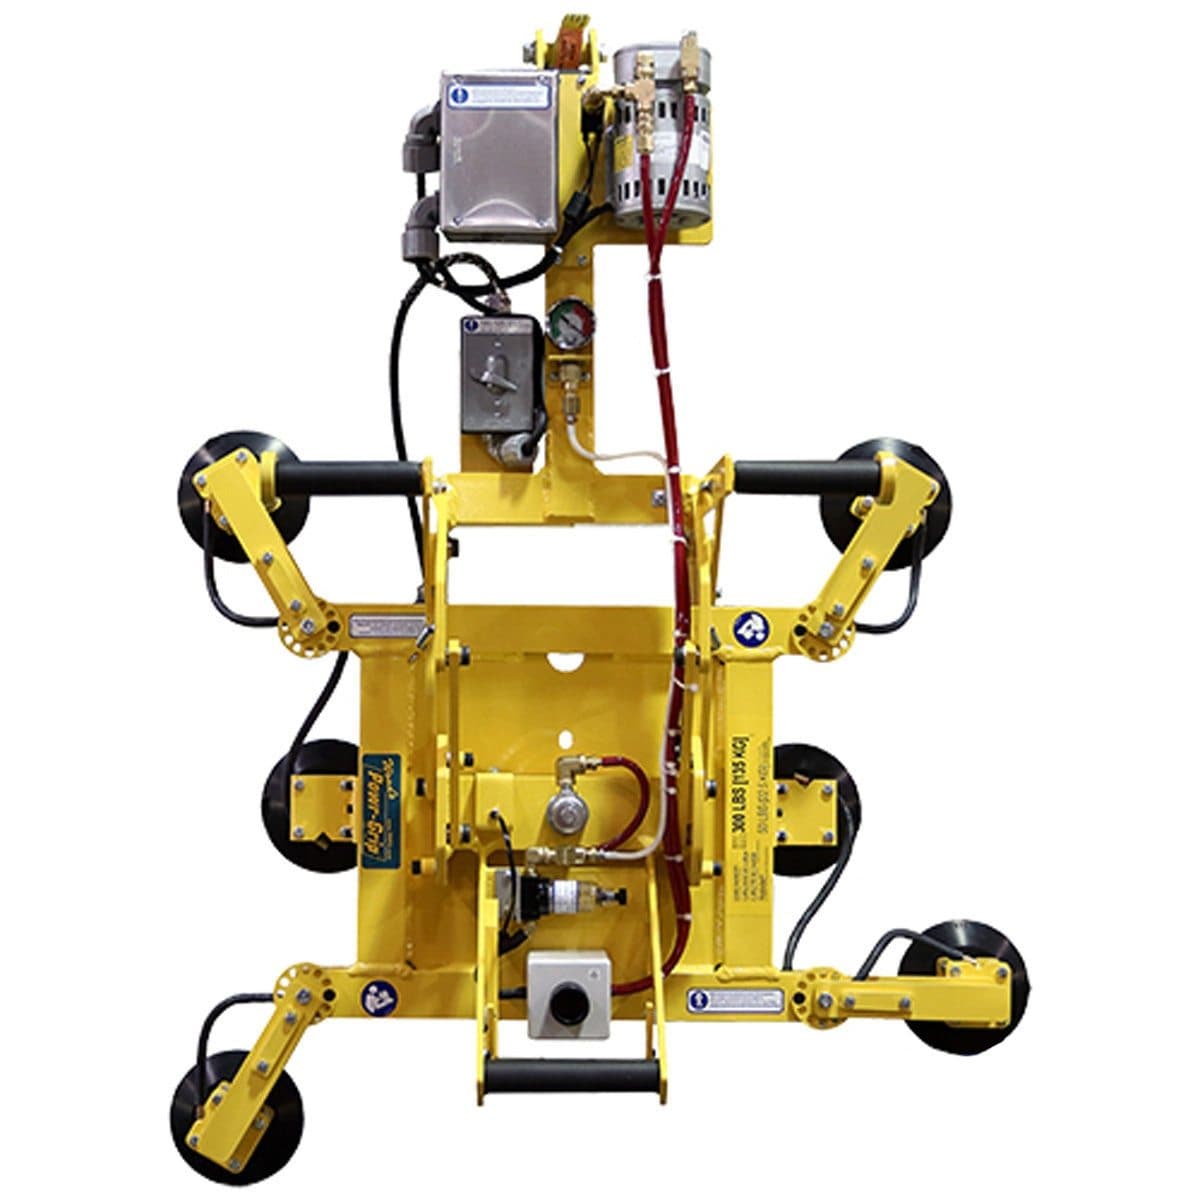 300 - MRTA Compact Production Lifter Series - Wood's Powr-Grip